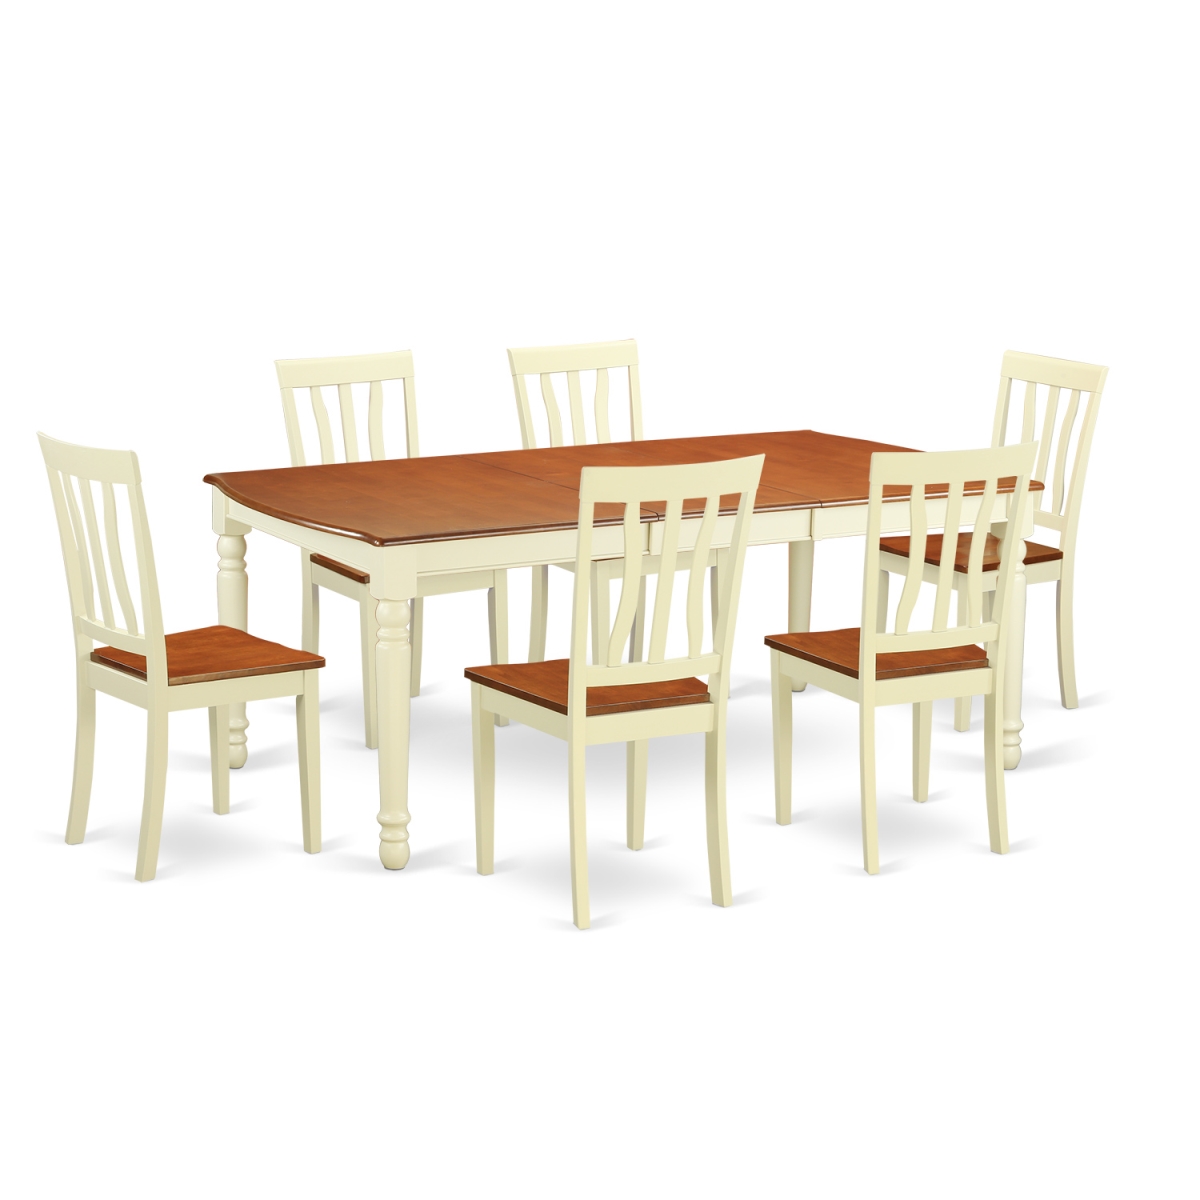 Picture of East West Furniture DOAN7-WHI-W Dining Room Table Set with 6 Kitchen Table & 6 Chairs, Buttermilk & Cherry - 7 Piece